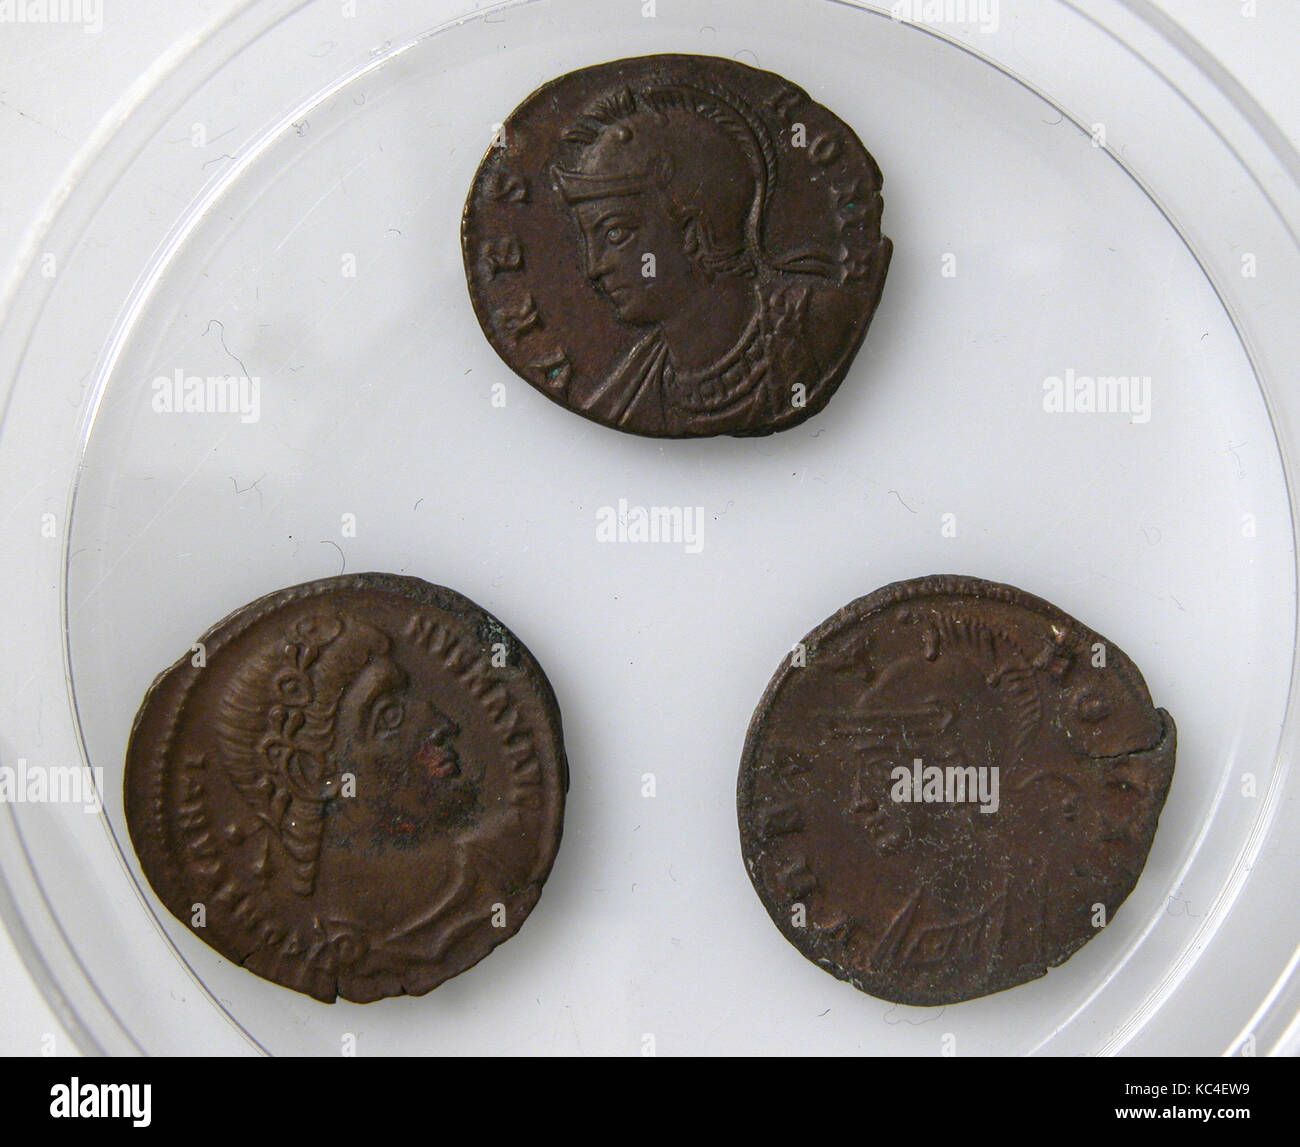 NEW BOOK: CLEANING ANCIENT BRONZE COINS